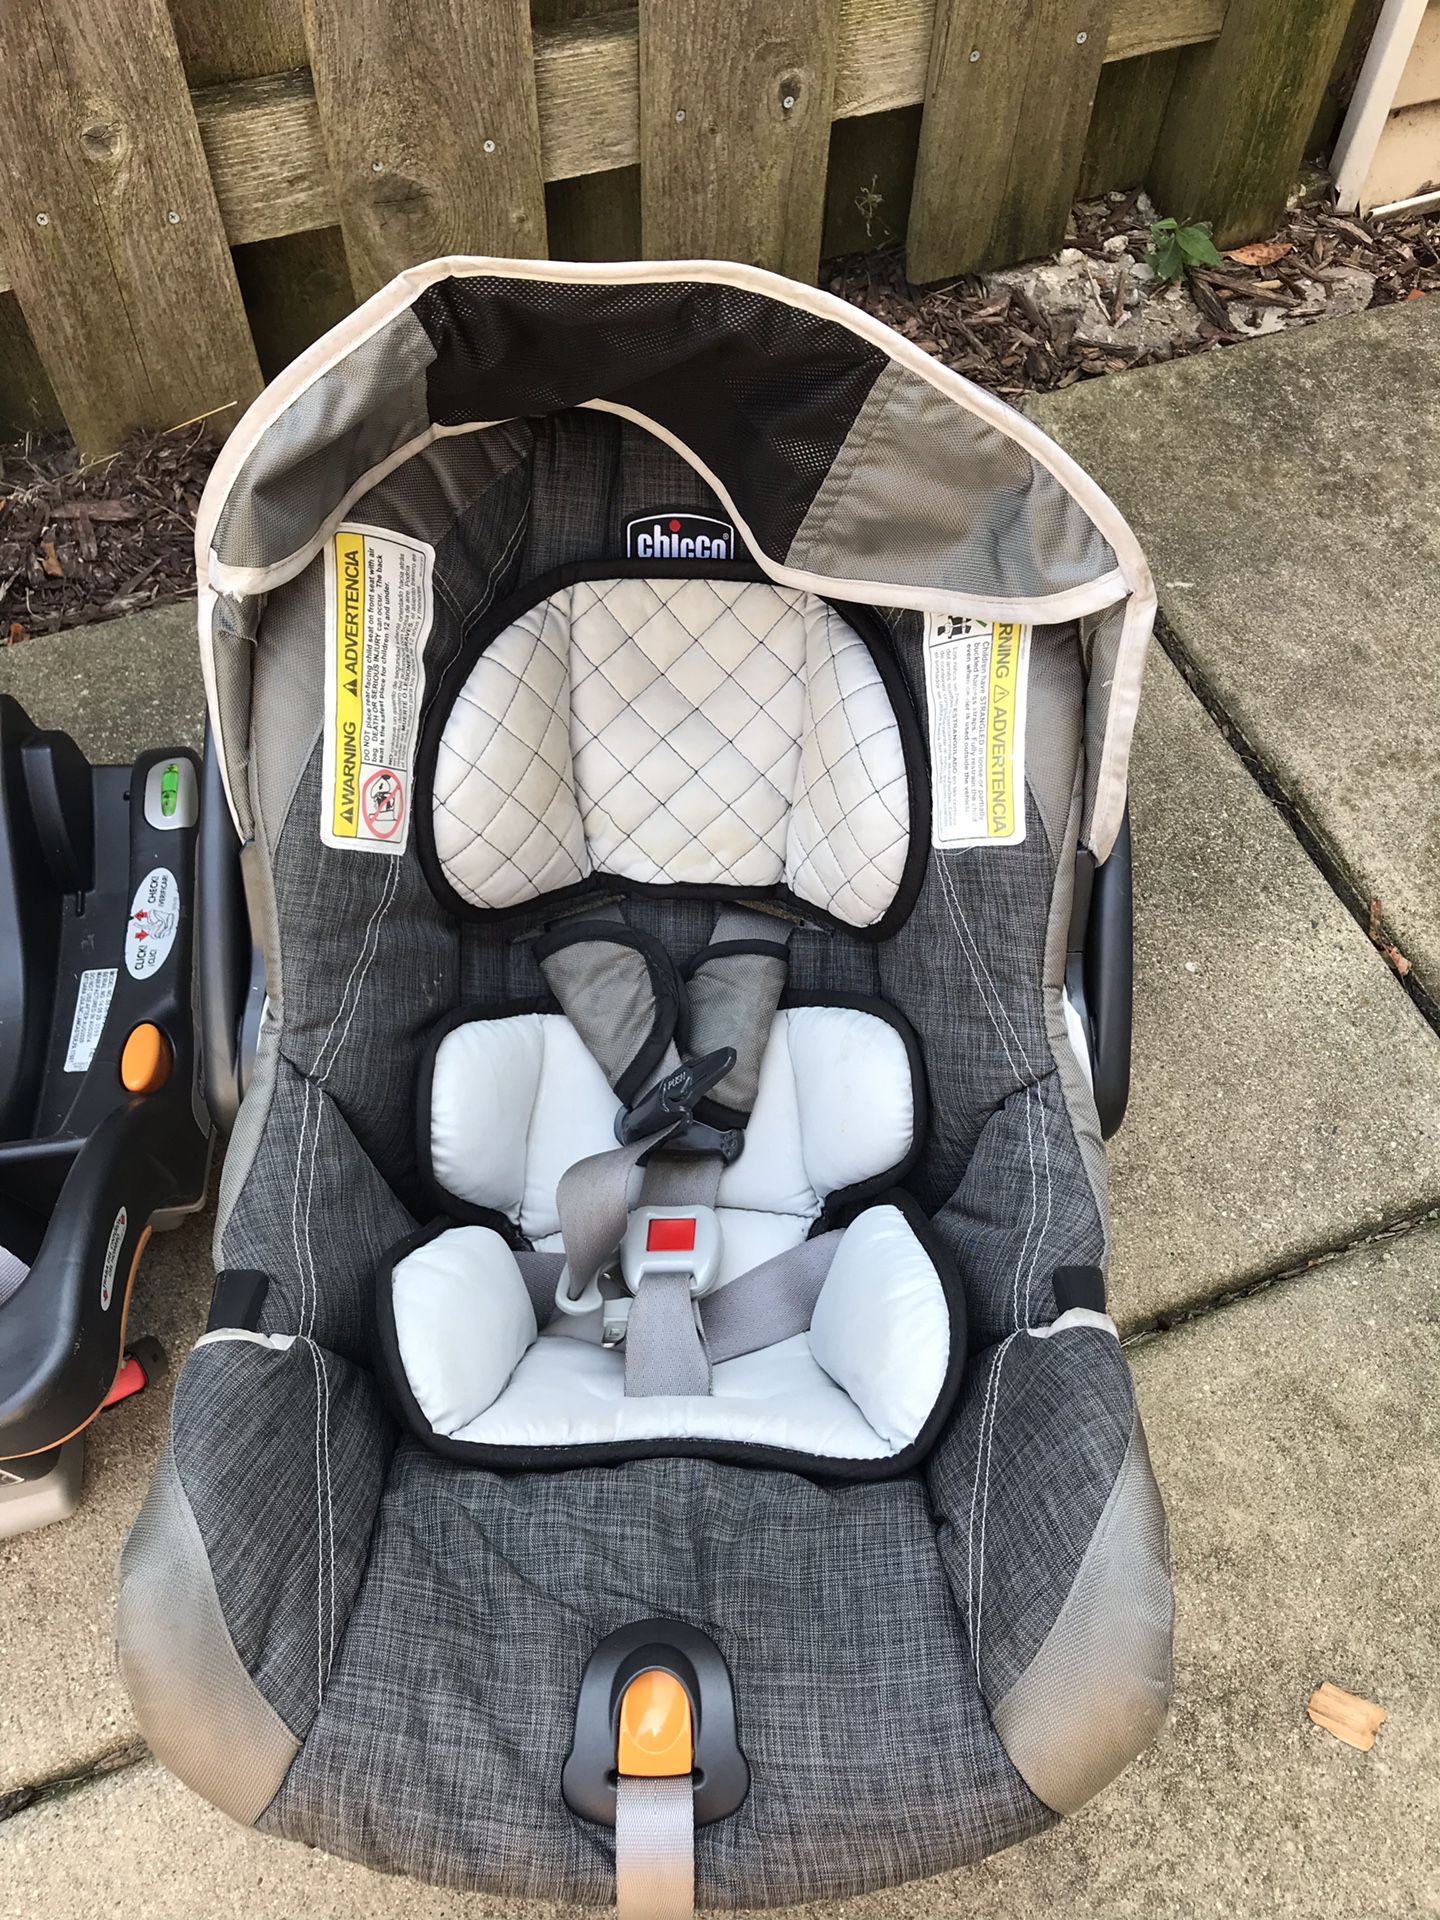 Chicco Keyfit car seat and base